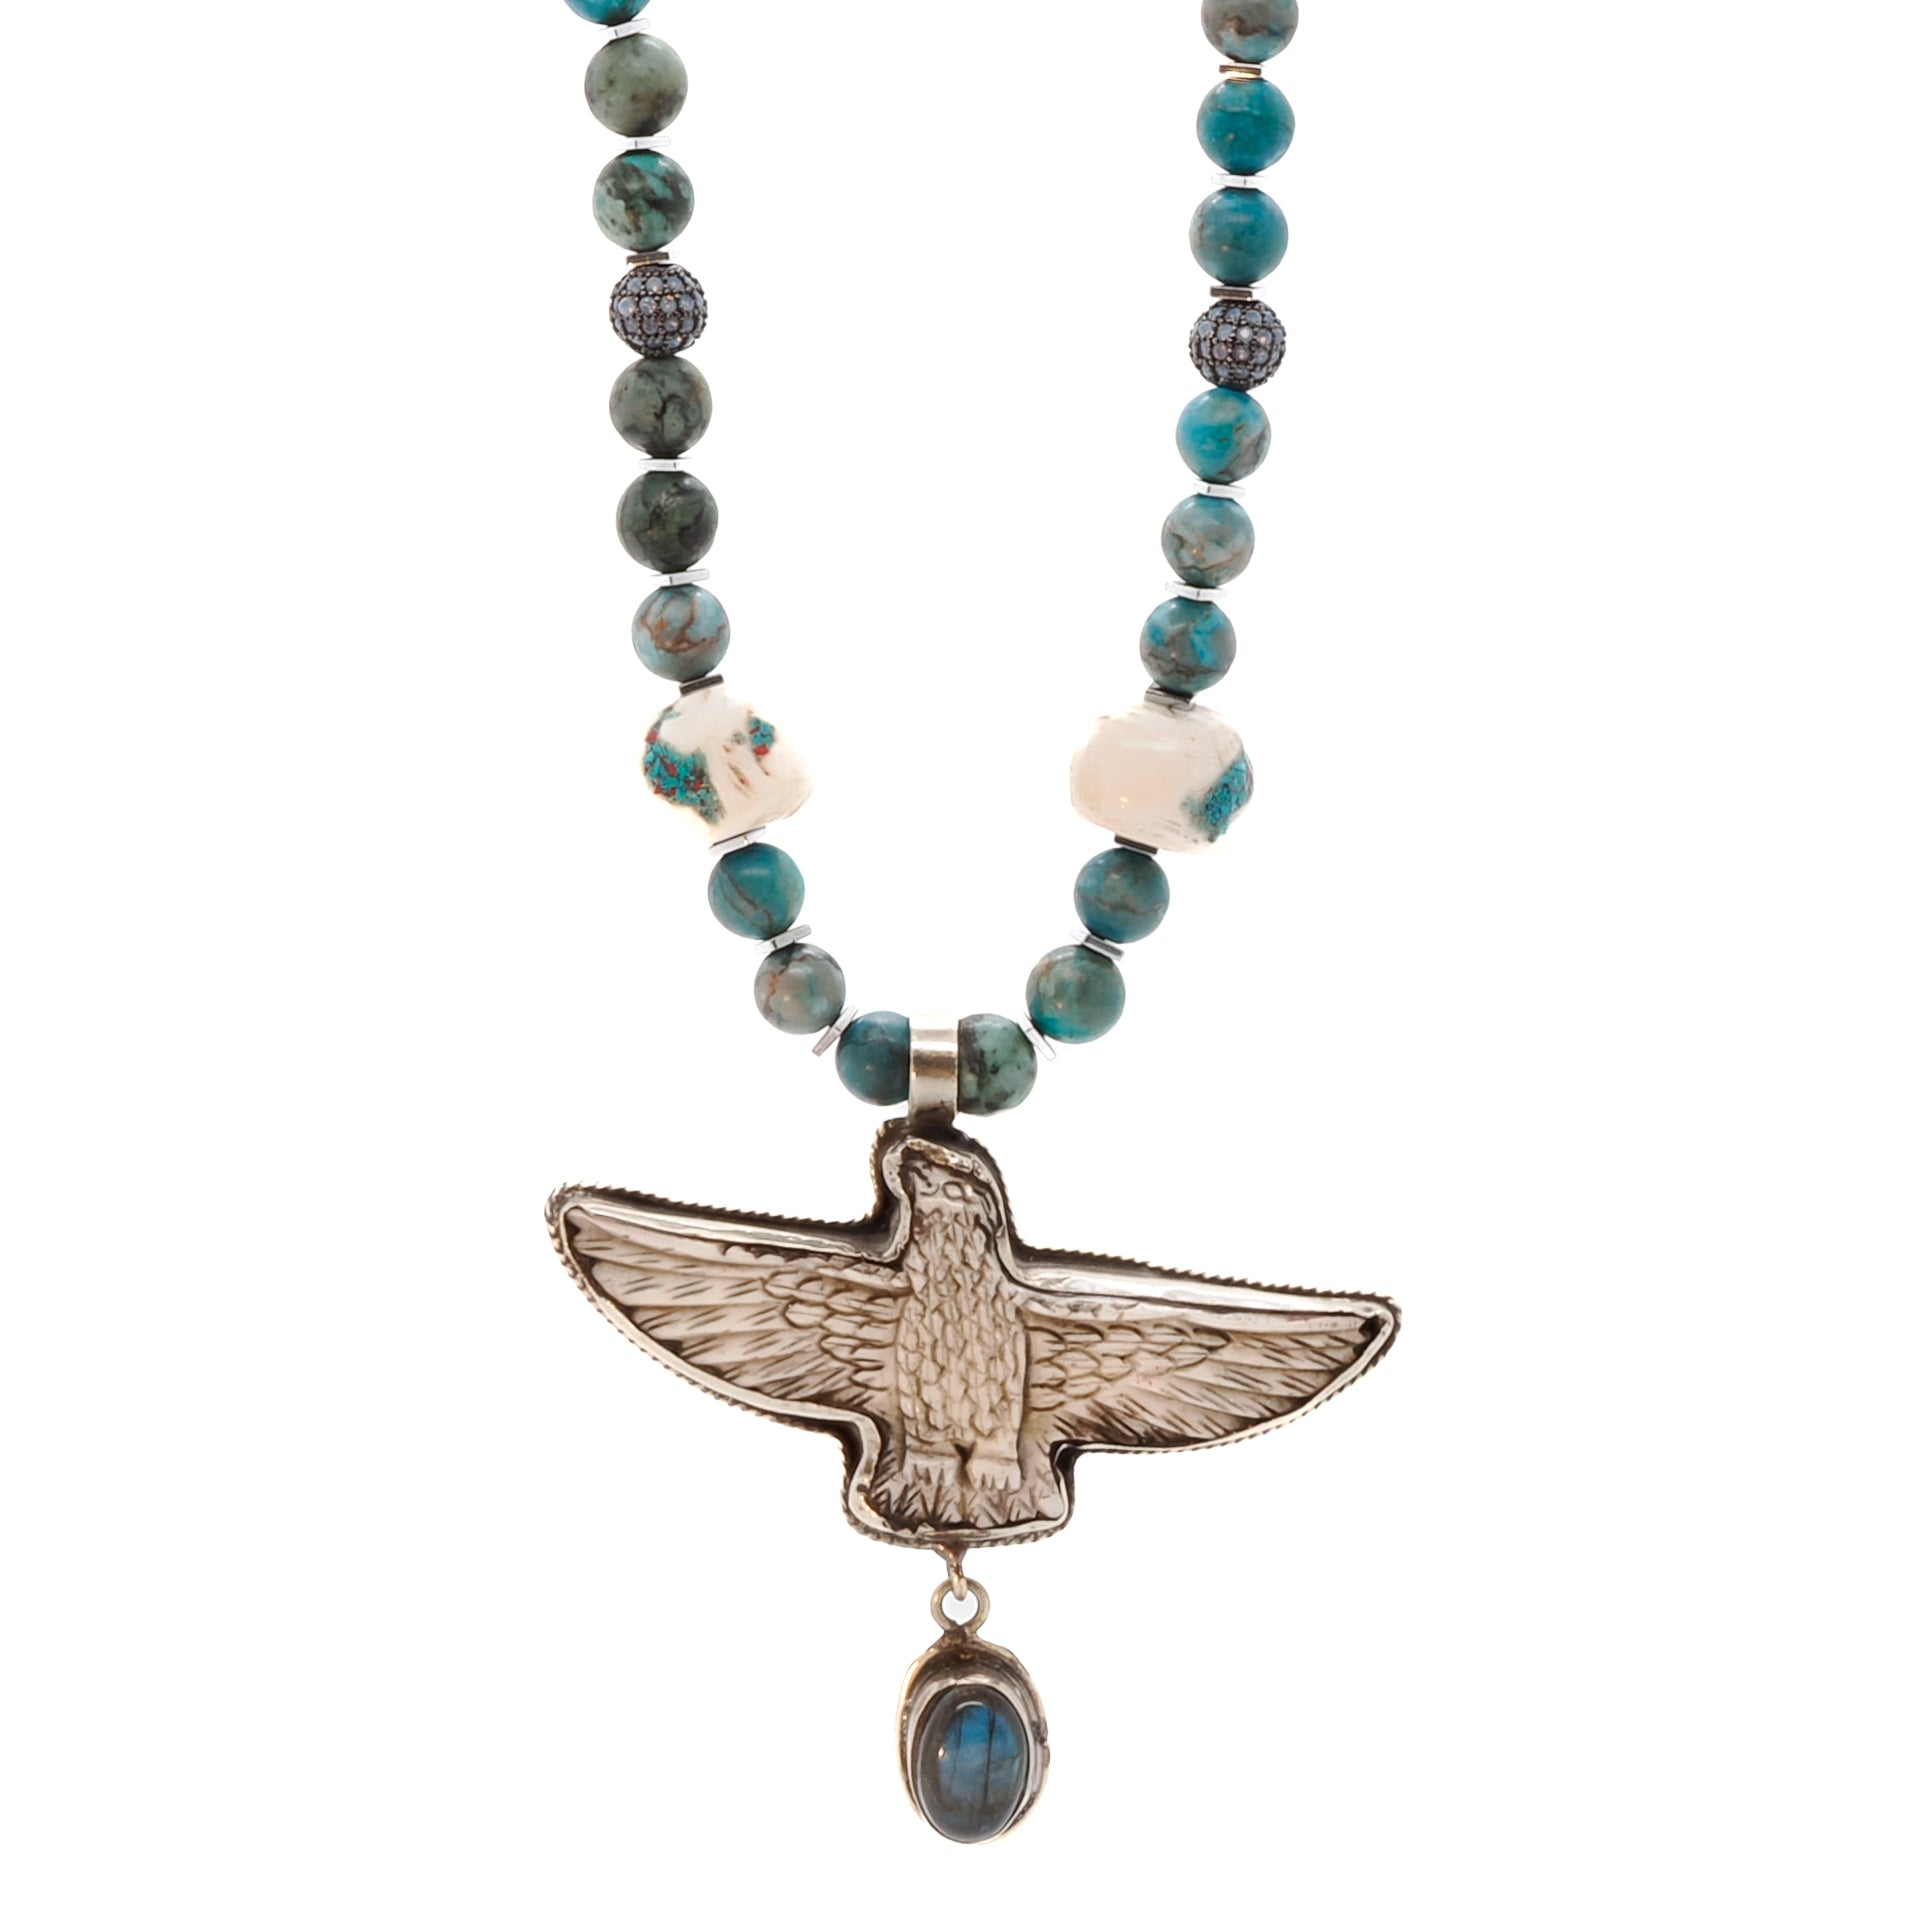 Freedom Eagle Necklace - Handcrafted accessory with crystal beads, African turquoise, evil eye beads, and an eagle pendant representing strength and rebirth.